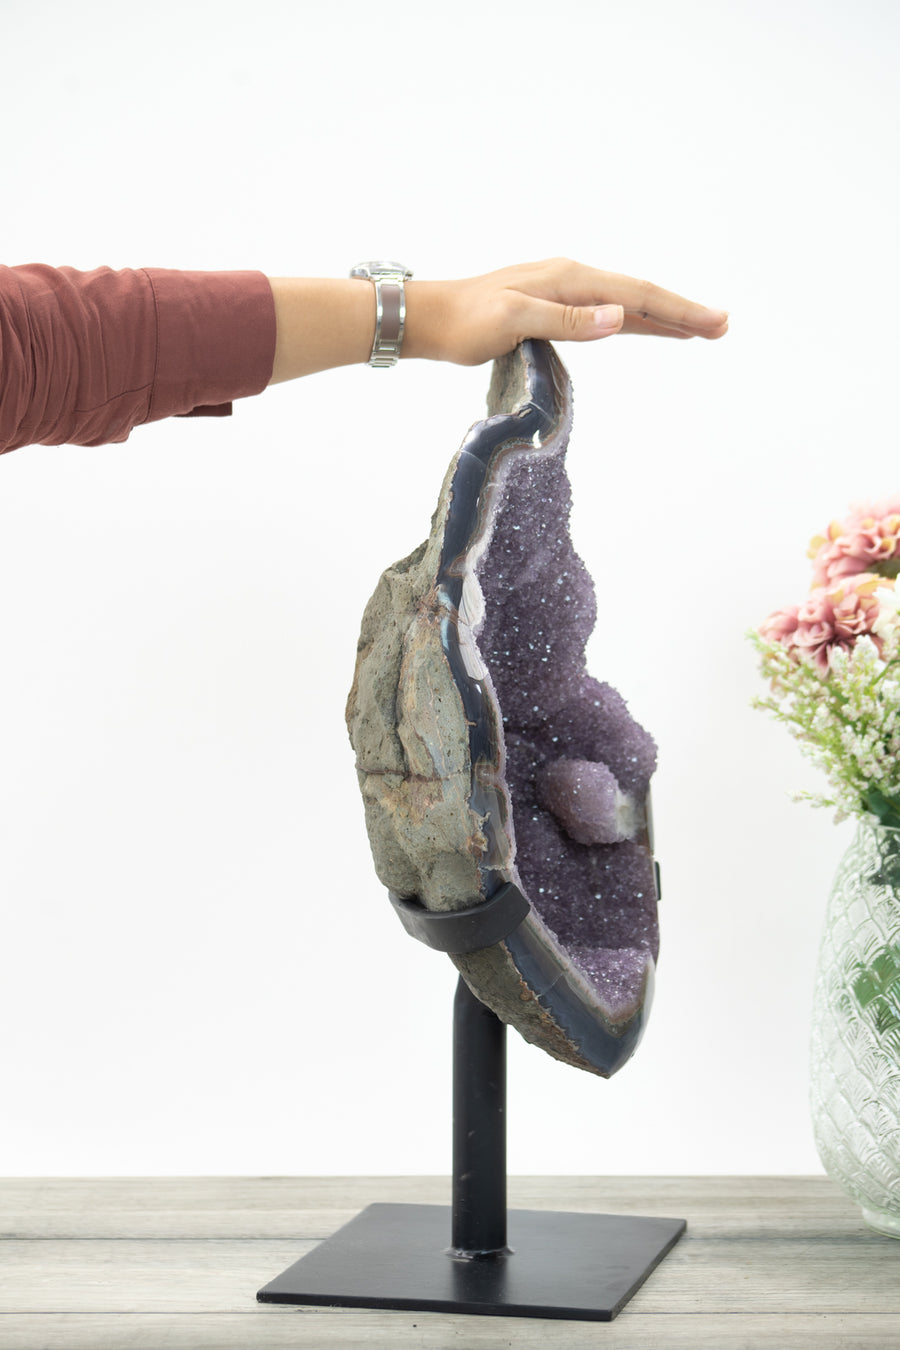 Unique XXL Lavender Amethyst Cluster with Agate Shell and Metal Stand - AWS1430